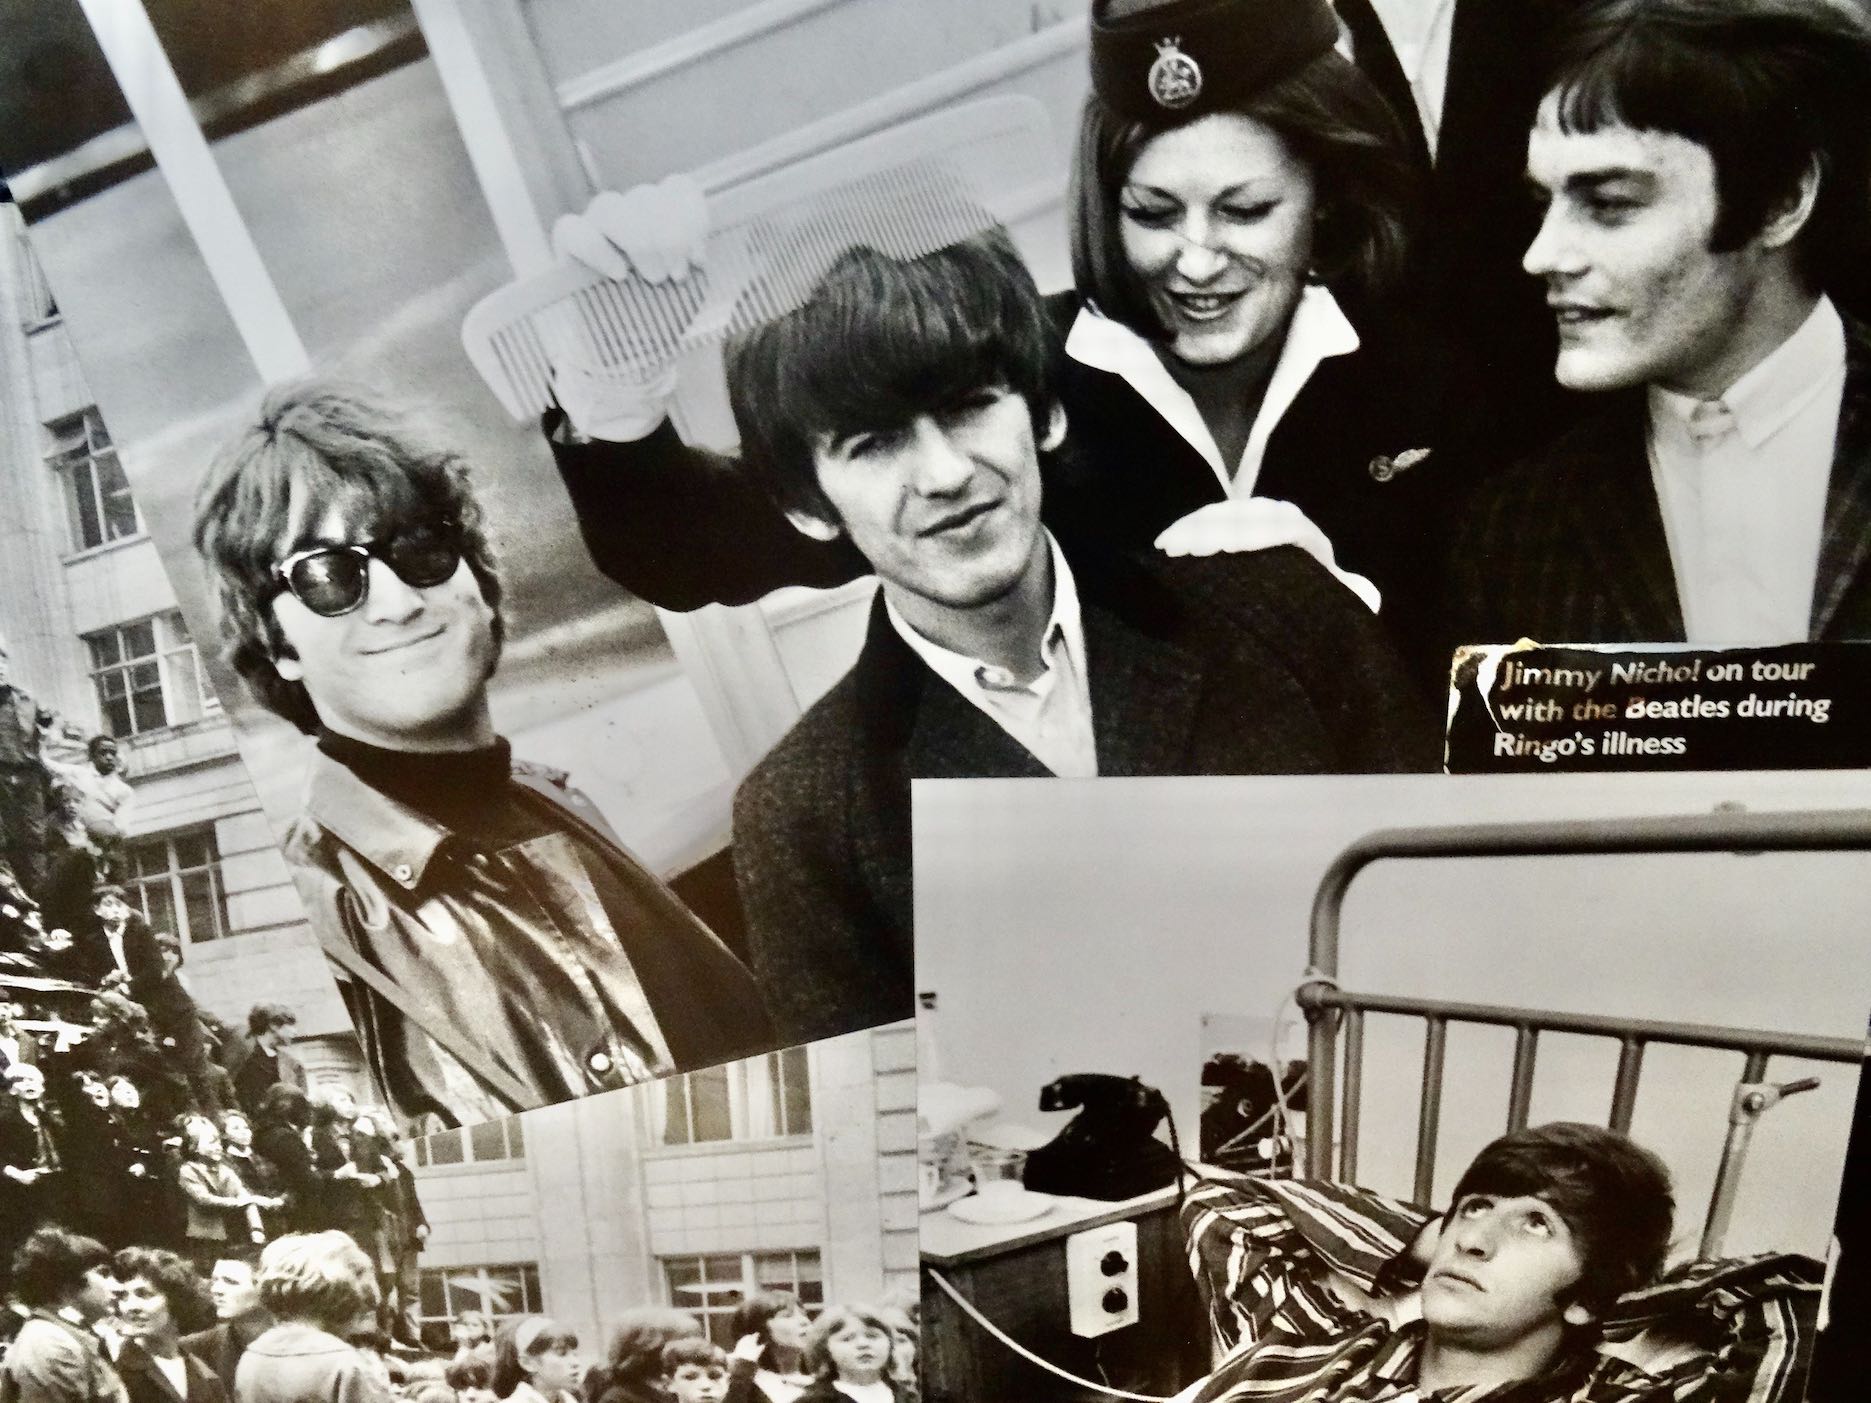 The Beatles Story exhibition in Liverpool